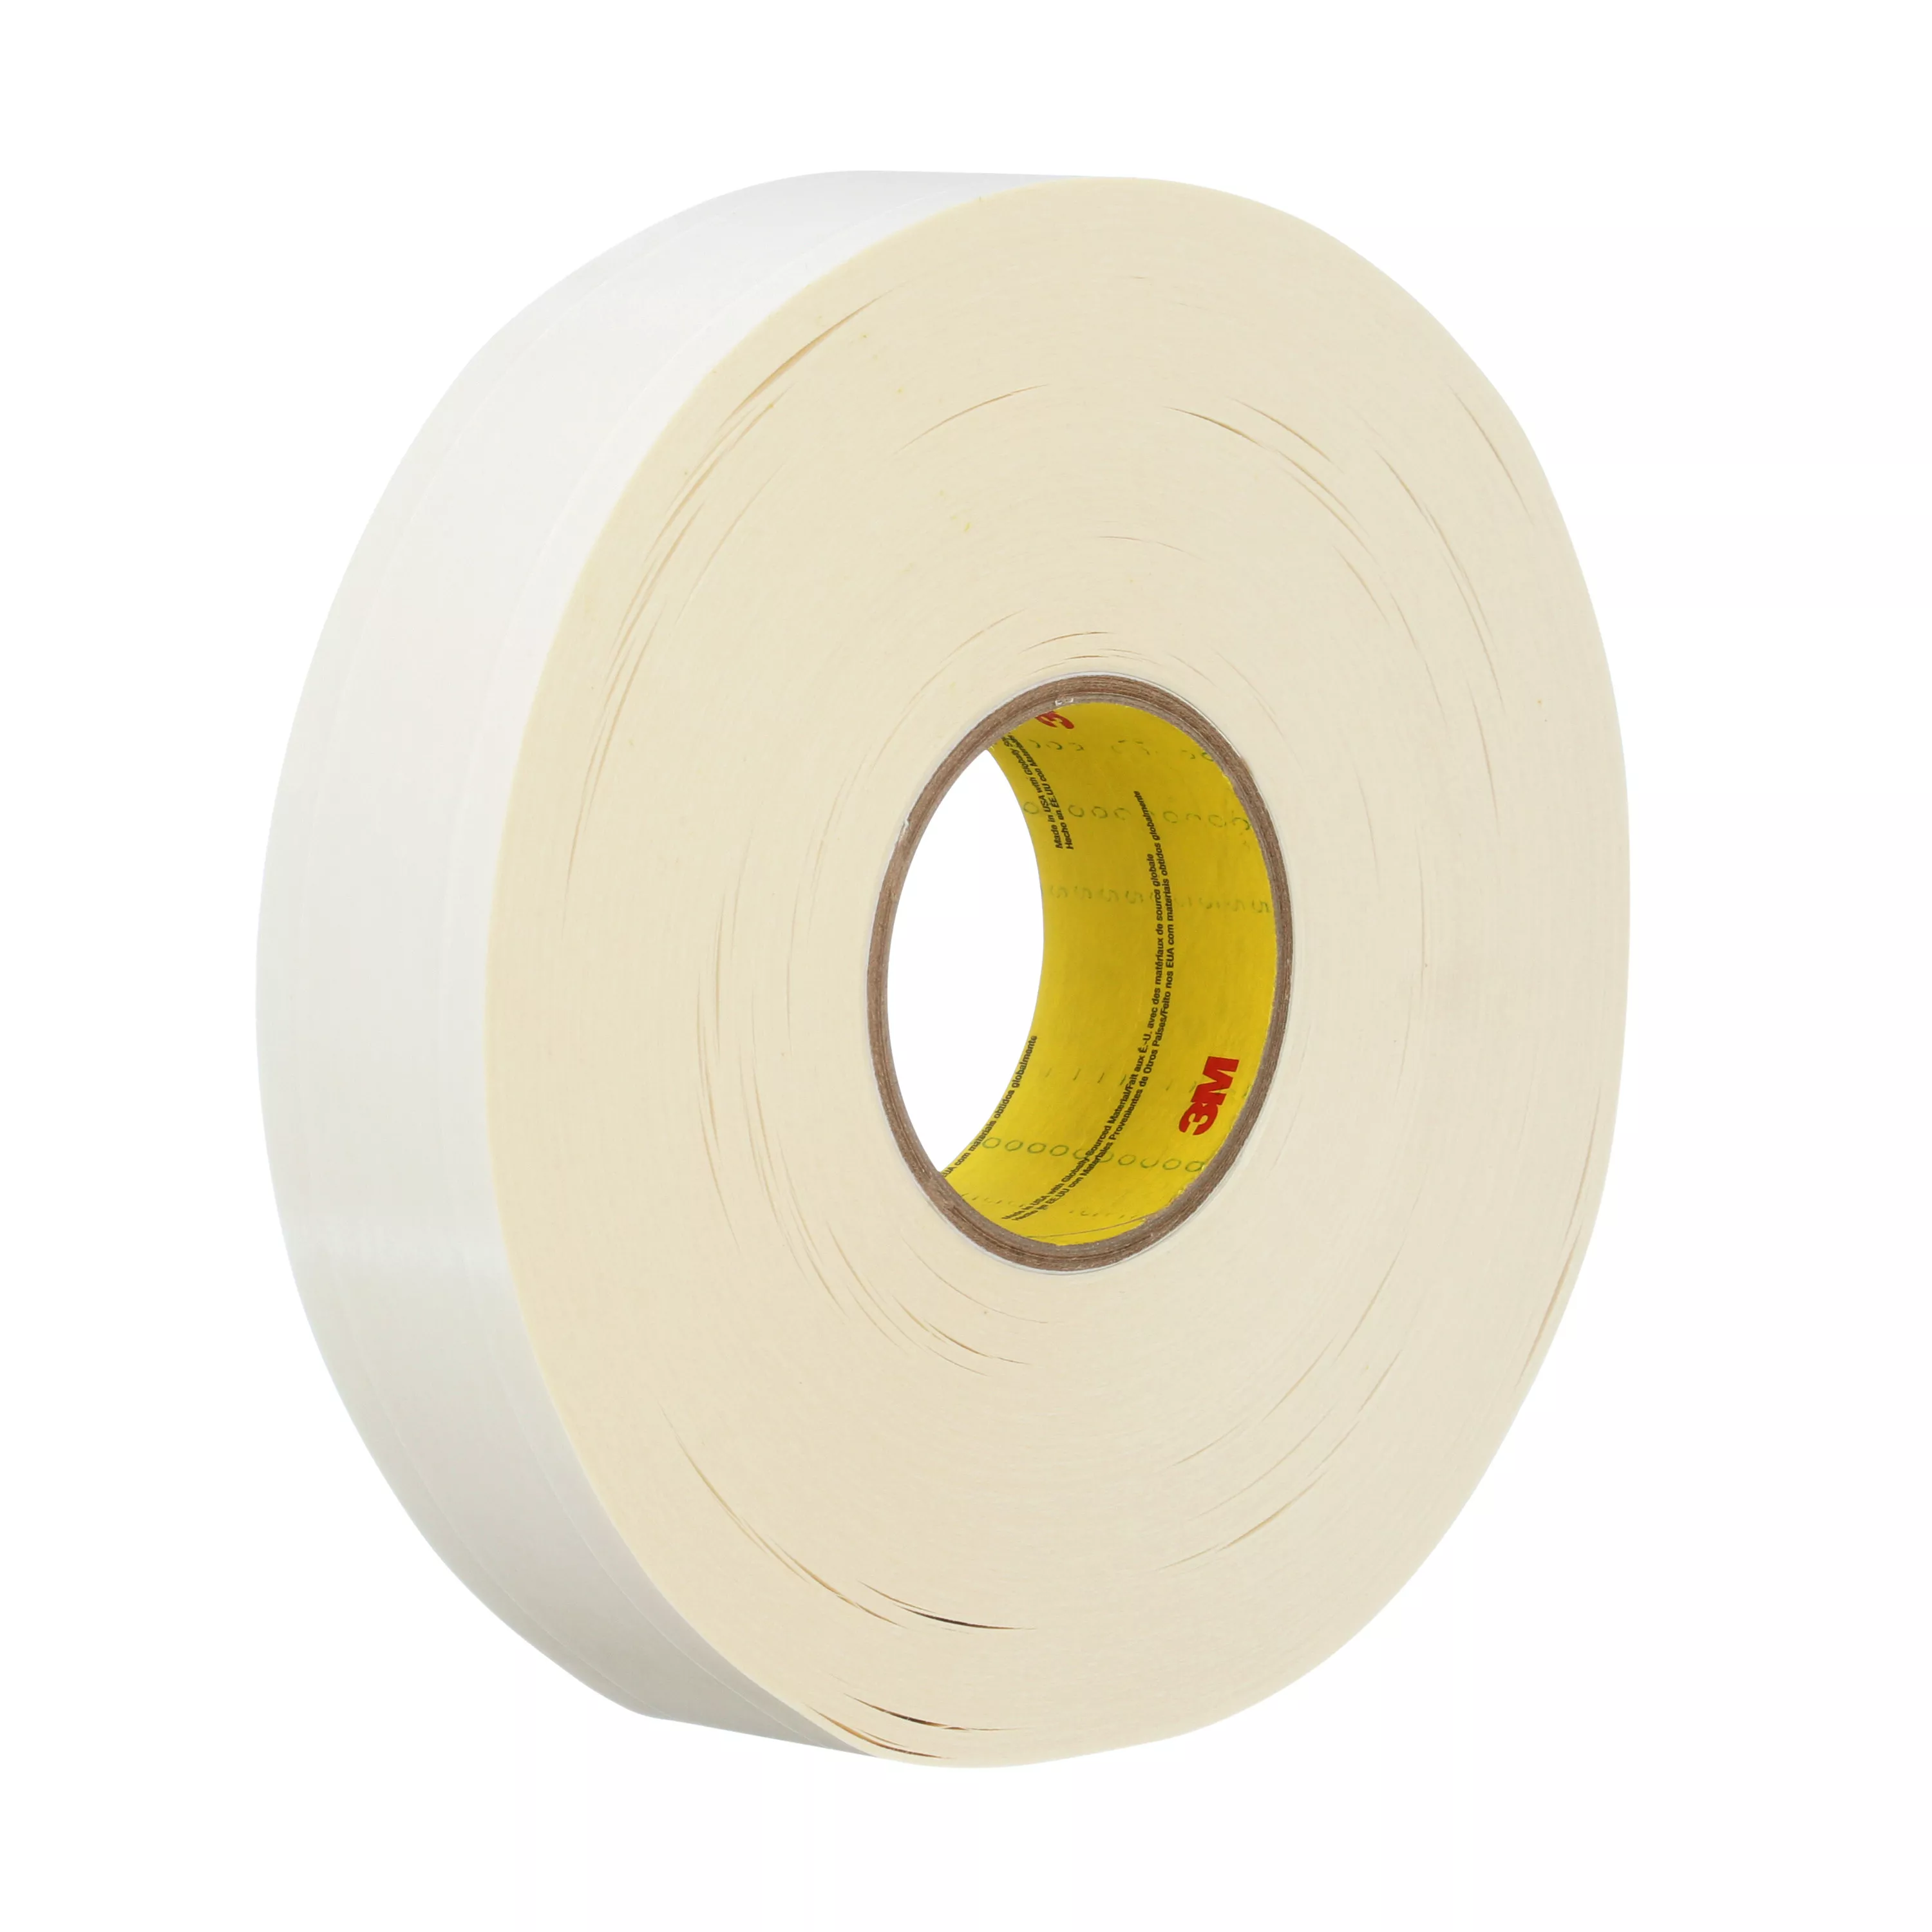 SKU 7100028178 | 3M™ Repulpable Heavy Duty Double Coated Tape R3287